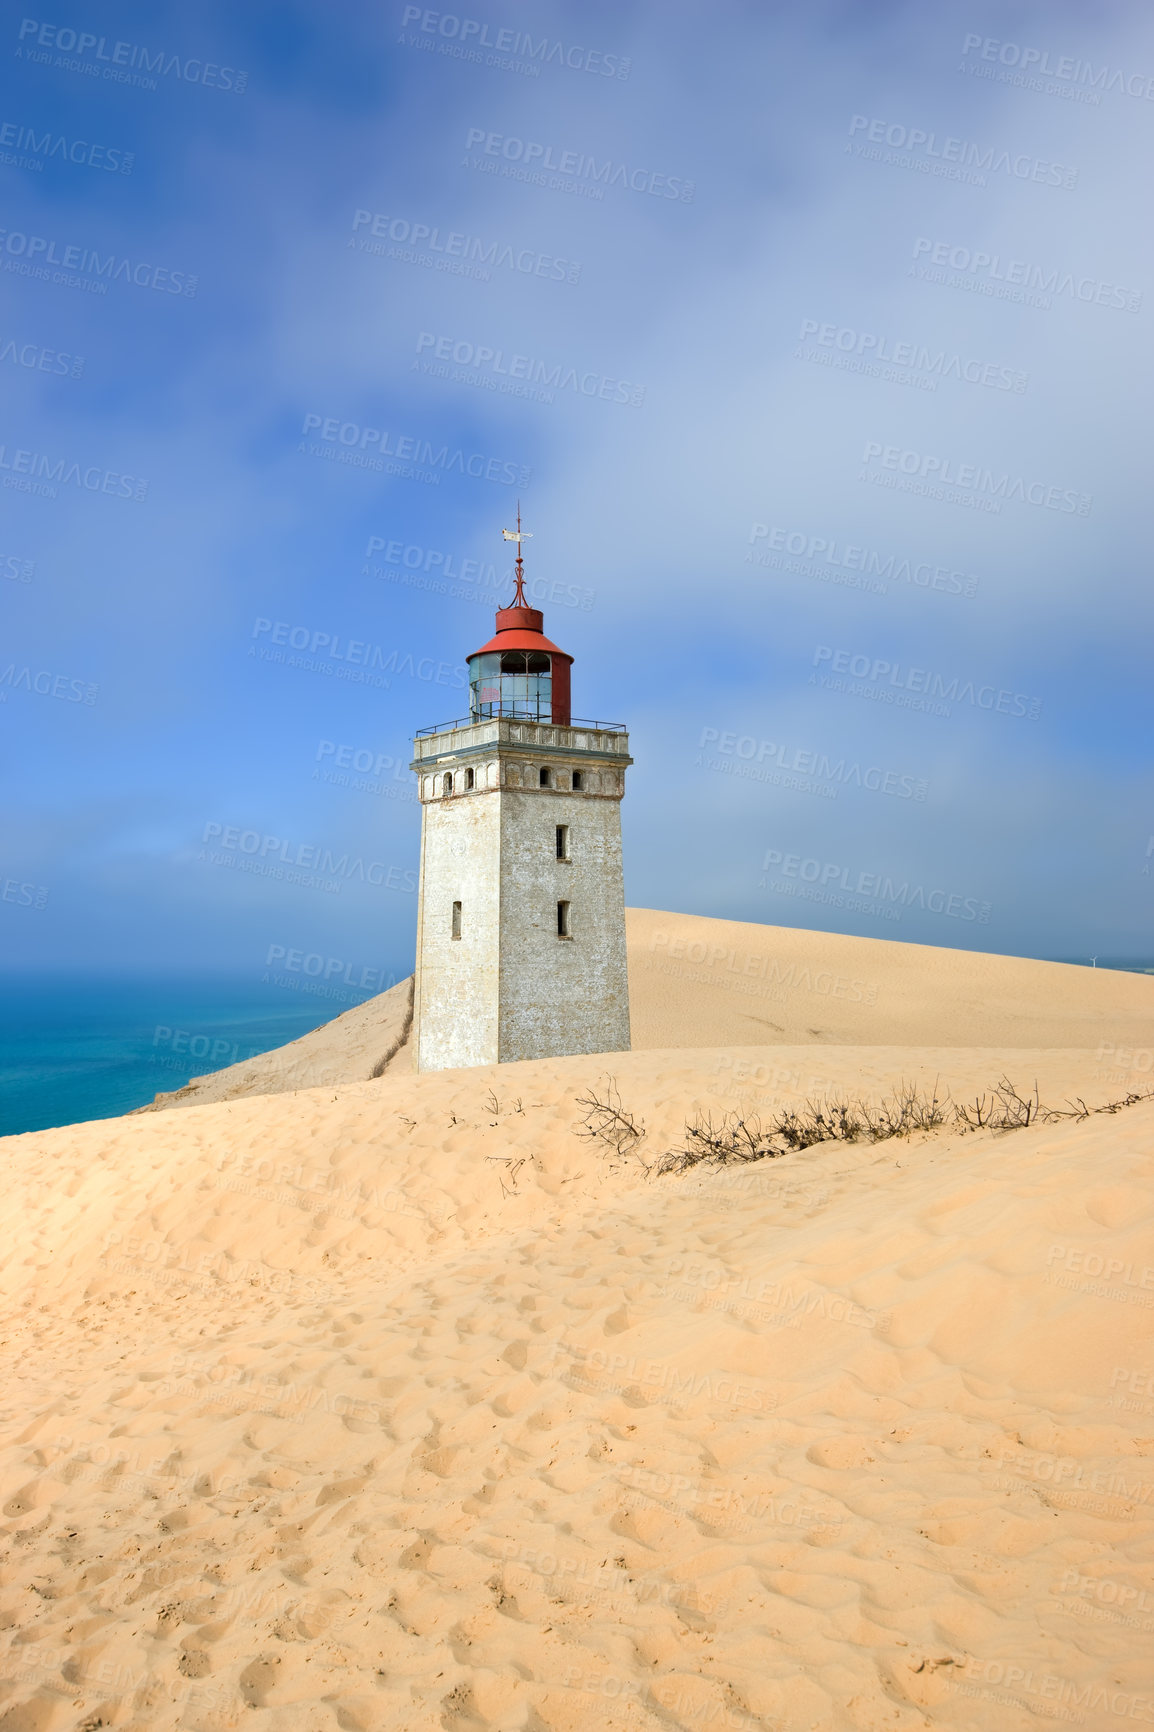 Buy stock photo Deserted lighthouse by the sea with blue sky in the background on a sunny day. A lighthouse in between the sandy area surrounded by water and cloudy sky. The mysterious old tower alone in the desert
